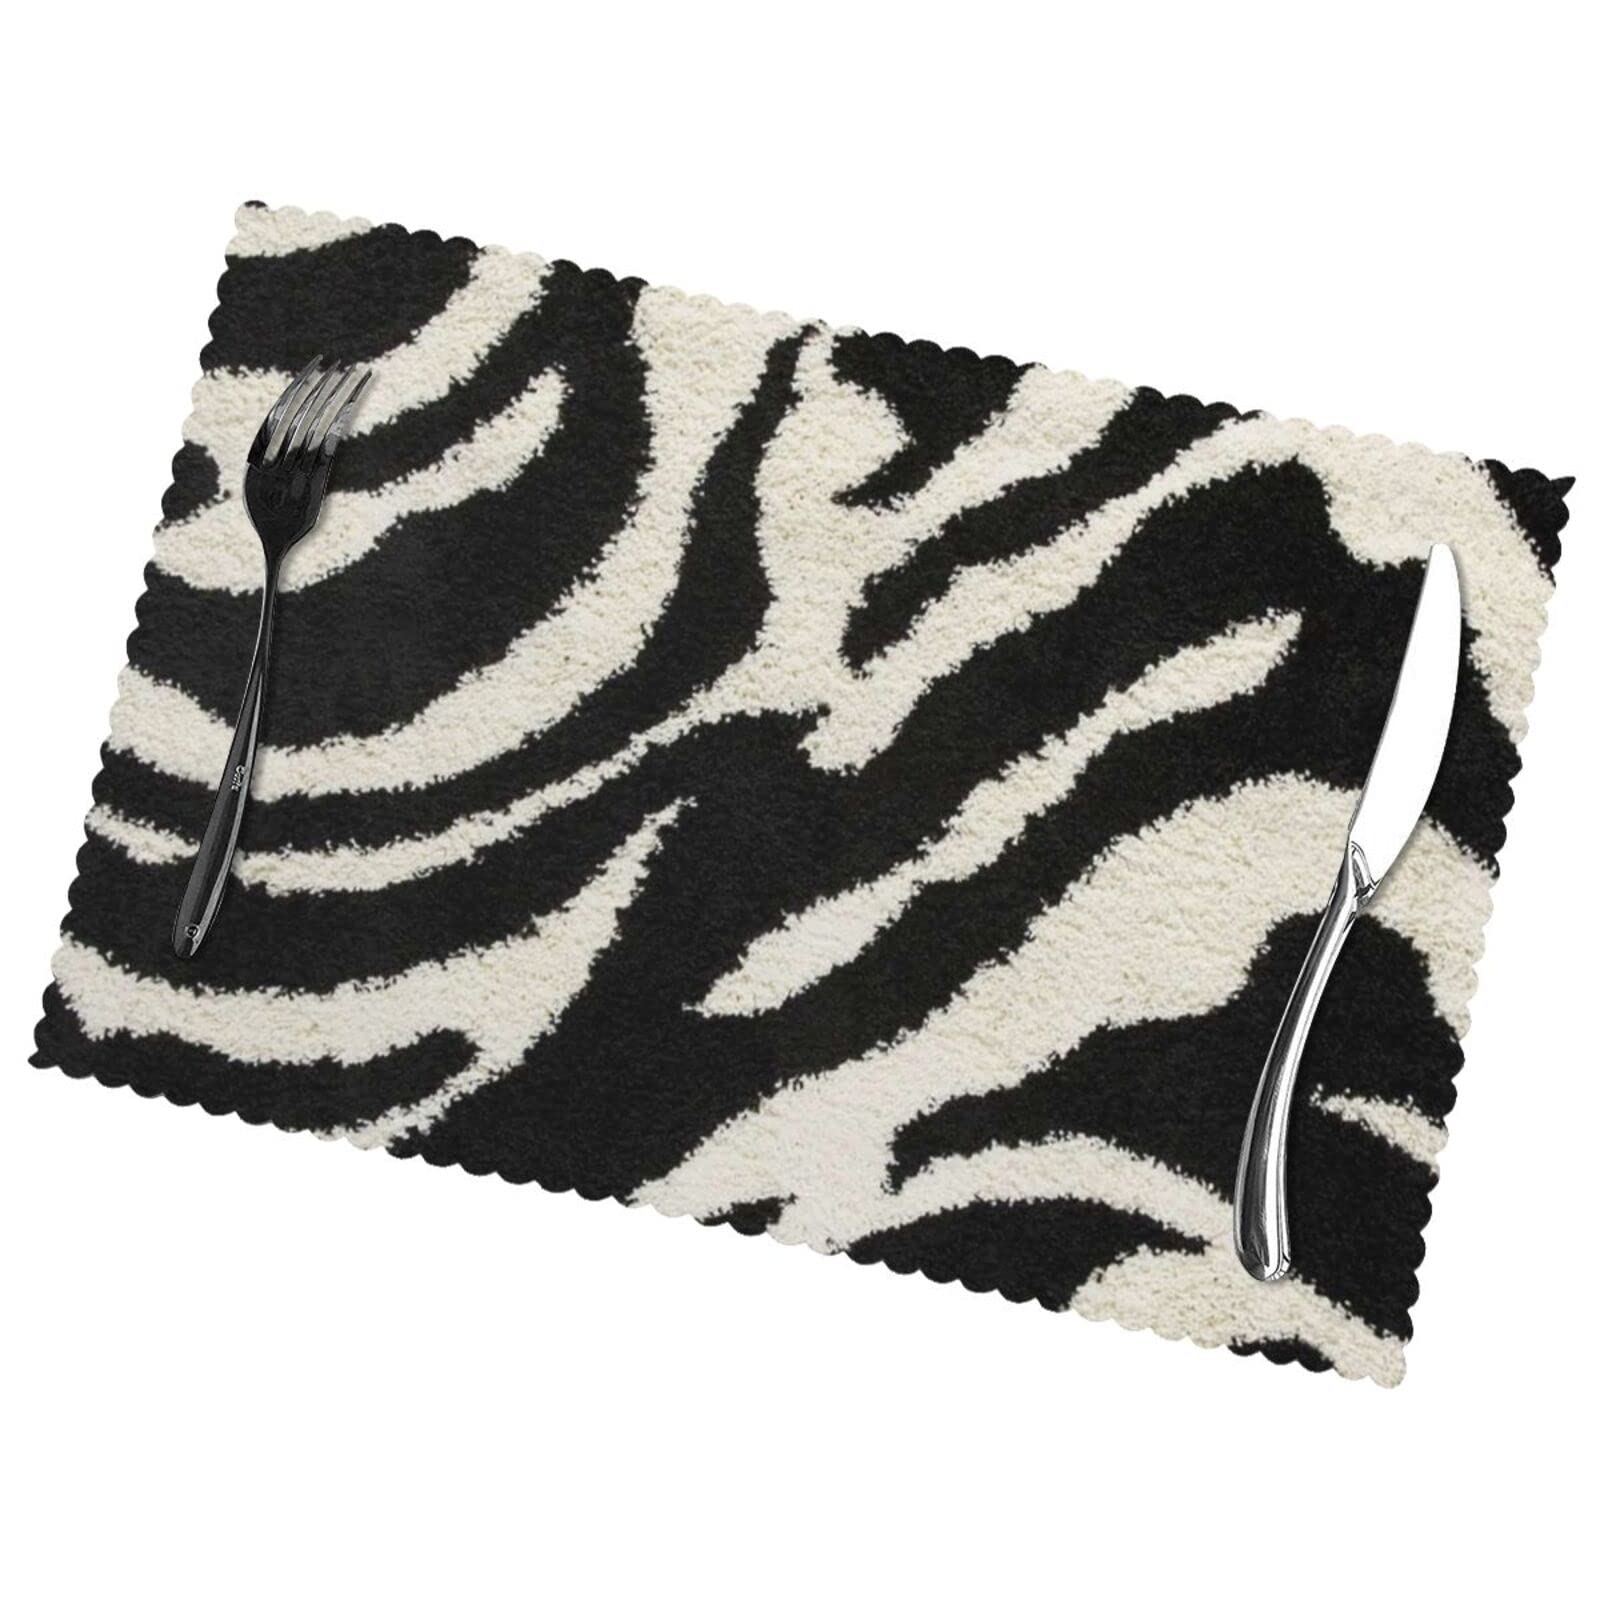 Zebra Animal Print Heat-Resistant Placemats Set of 6,Kitchen Restaurant Washable and Non Slip Tableware Mat 12x18 in